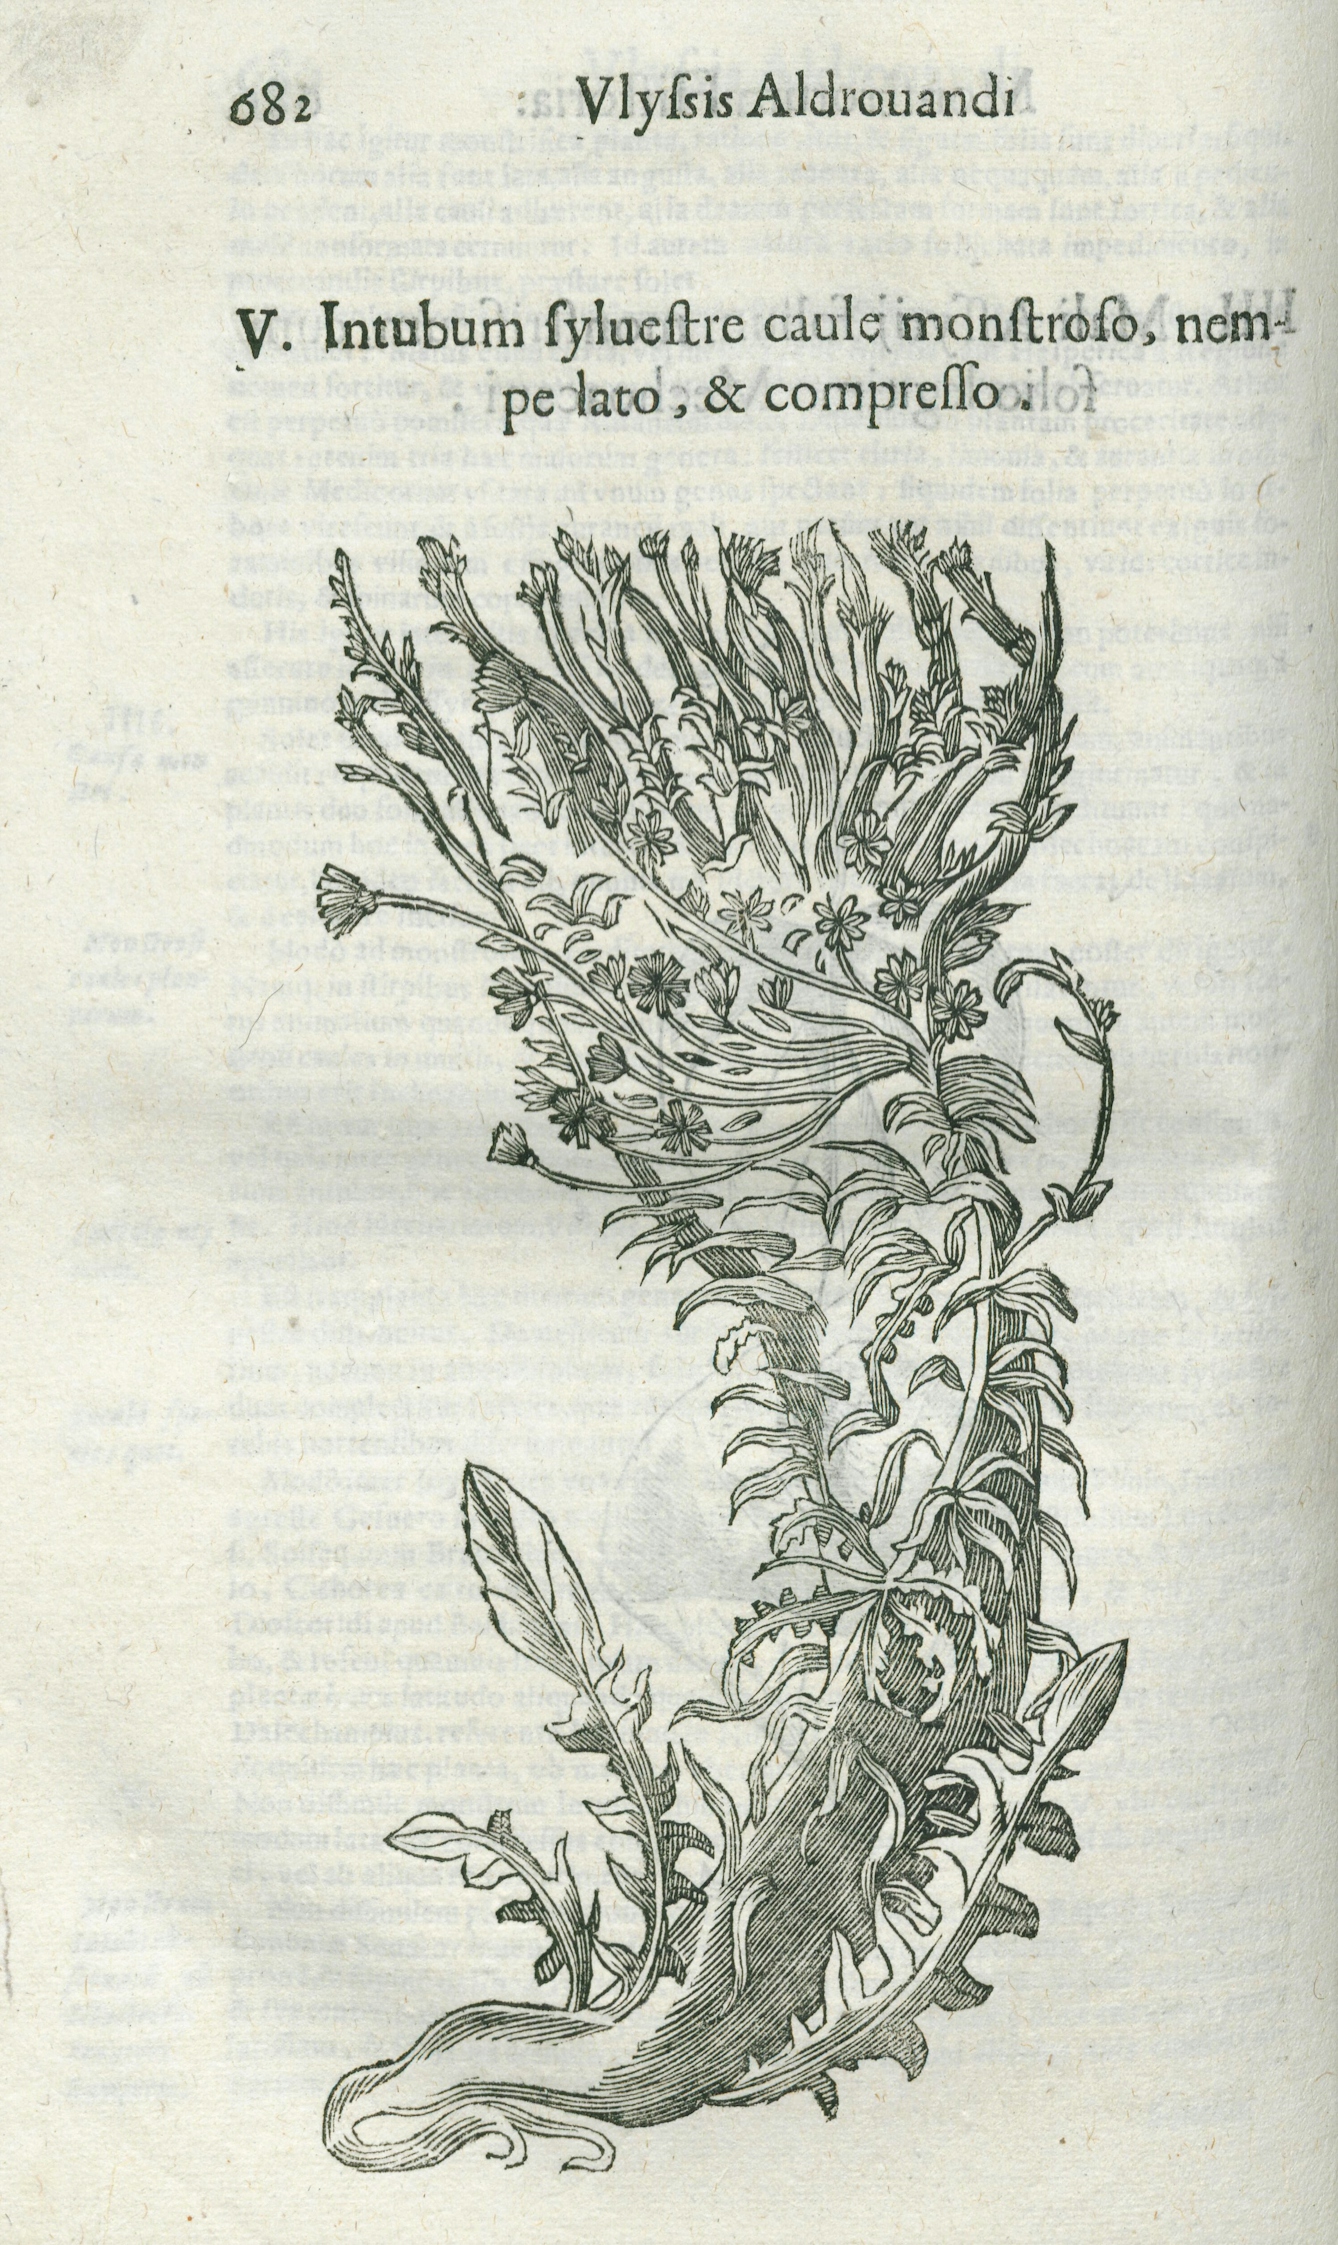 Line engraving of mutated chicory (plant).